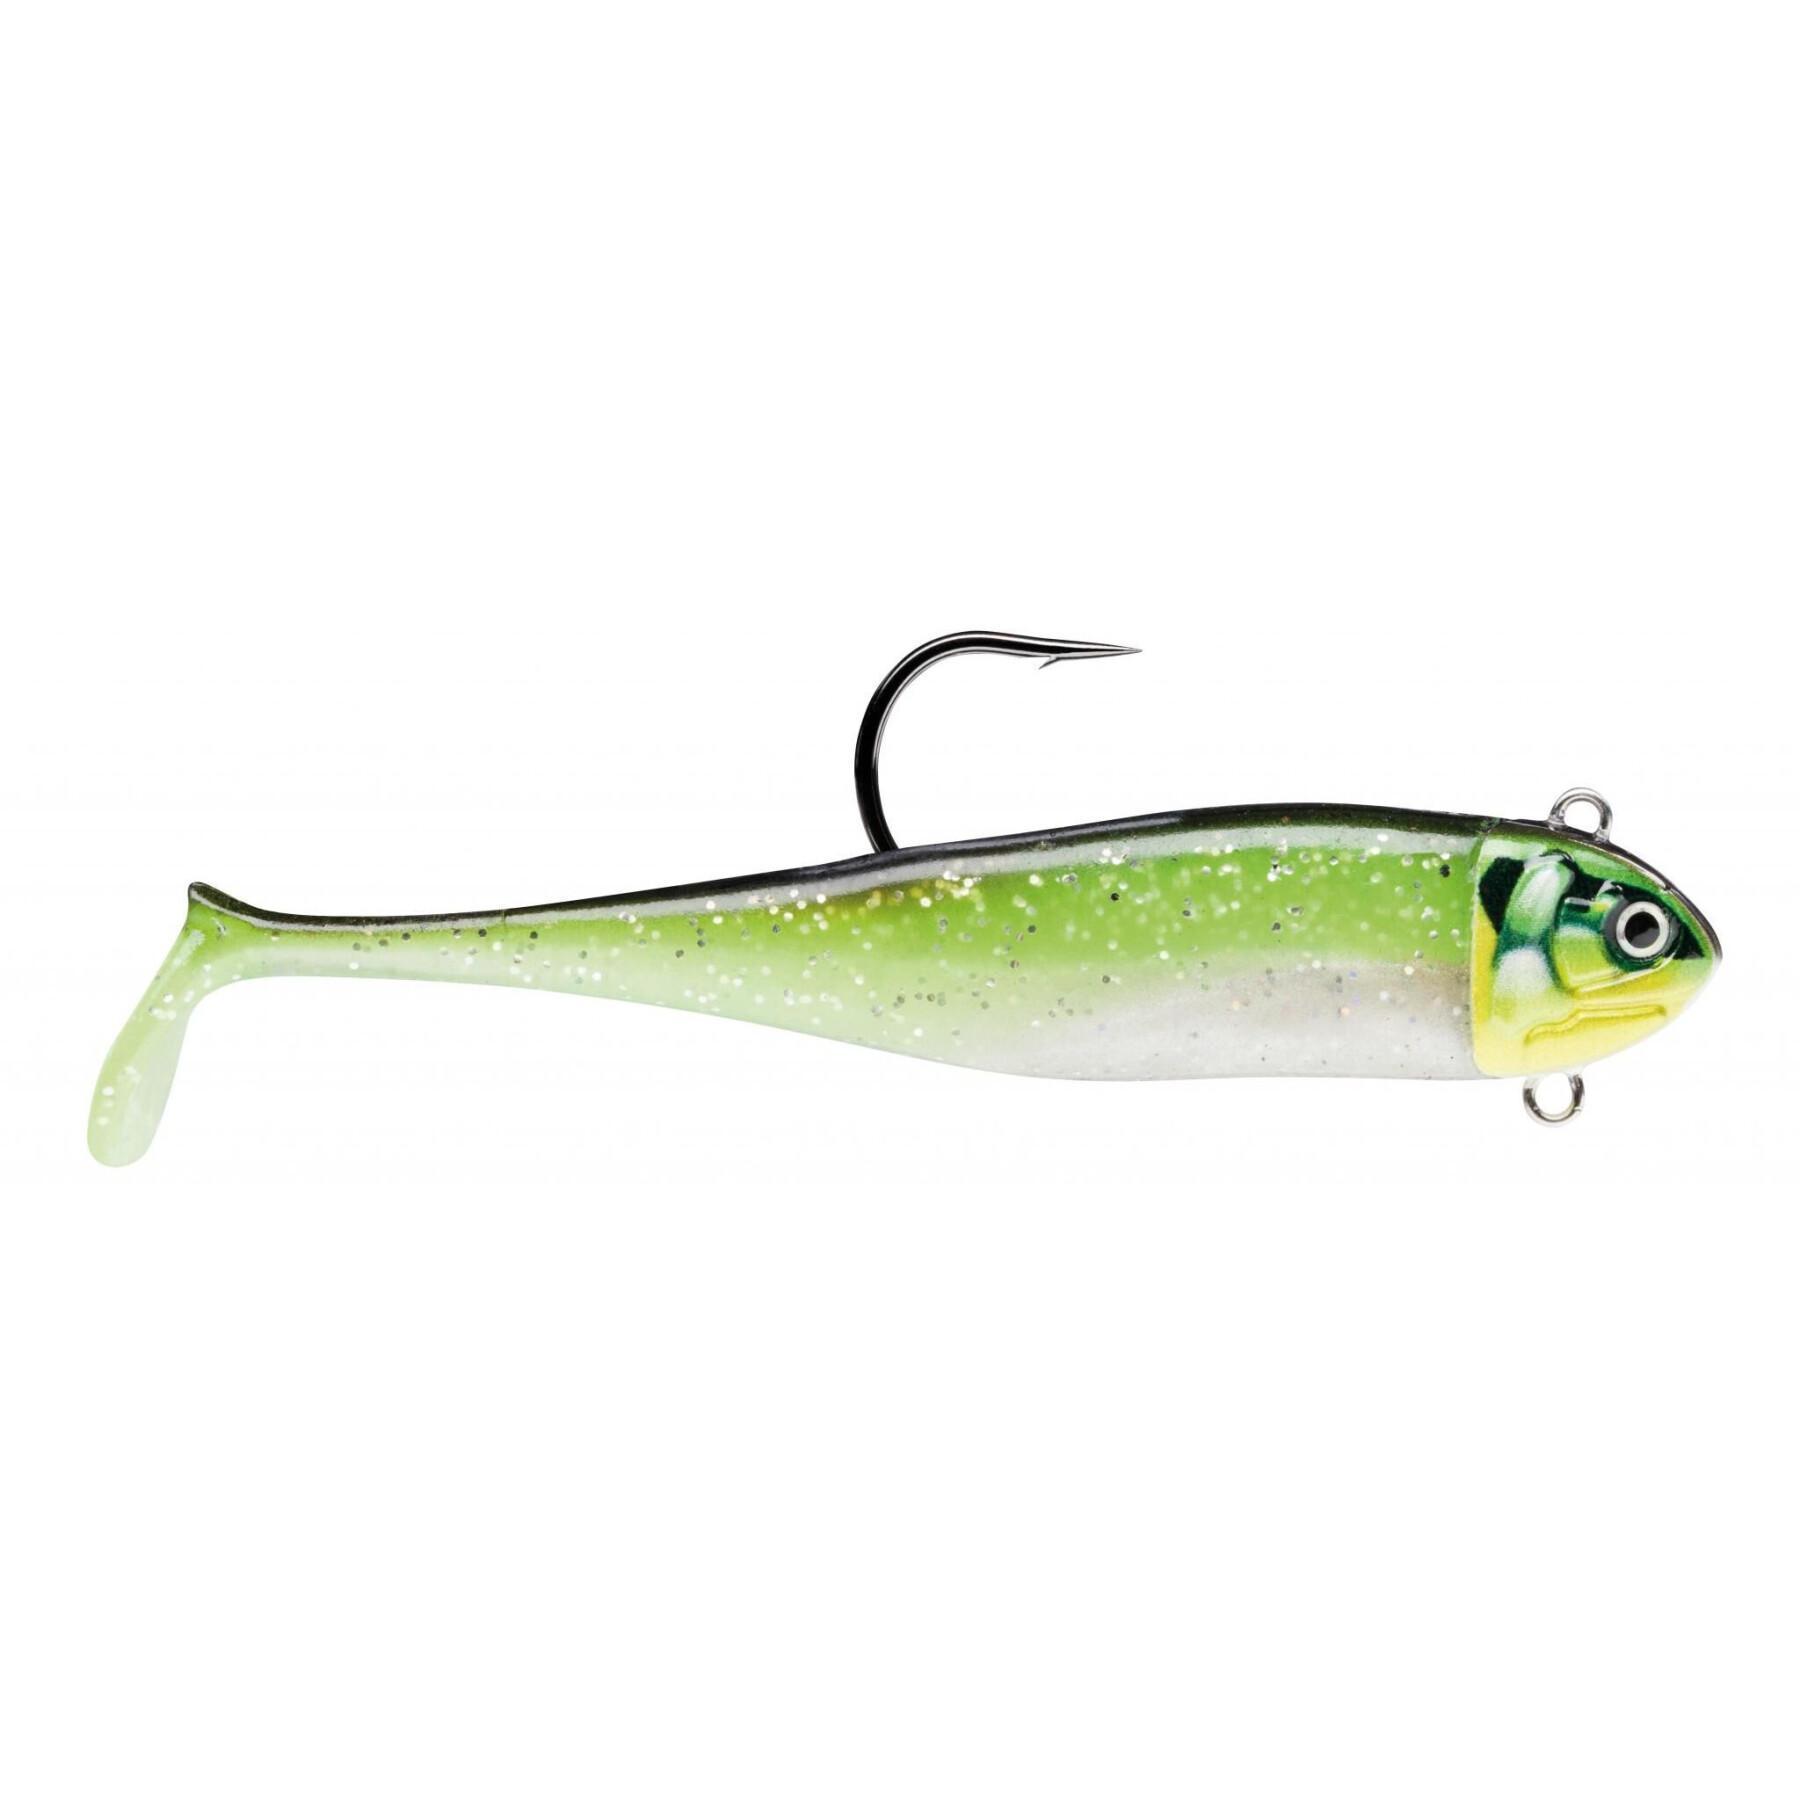 Lure Storm Biscay Minnow – 30g